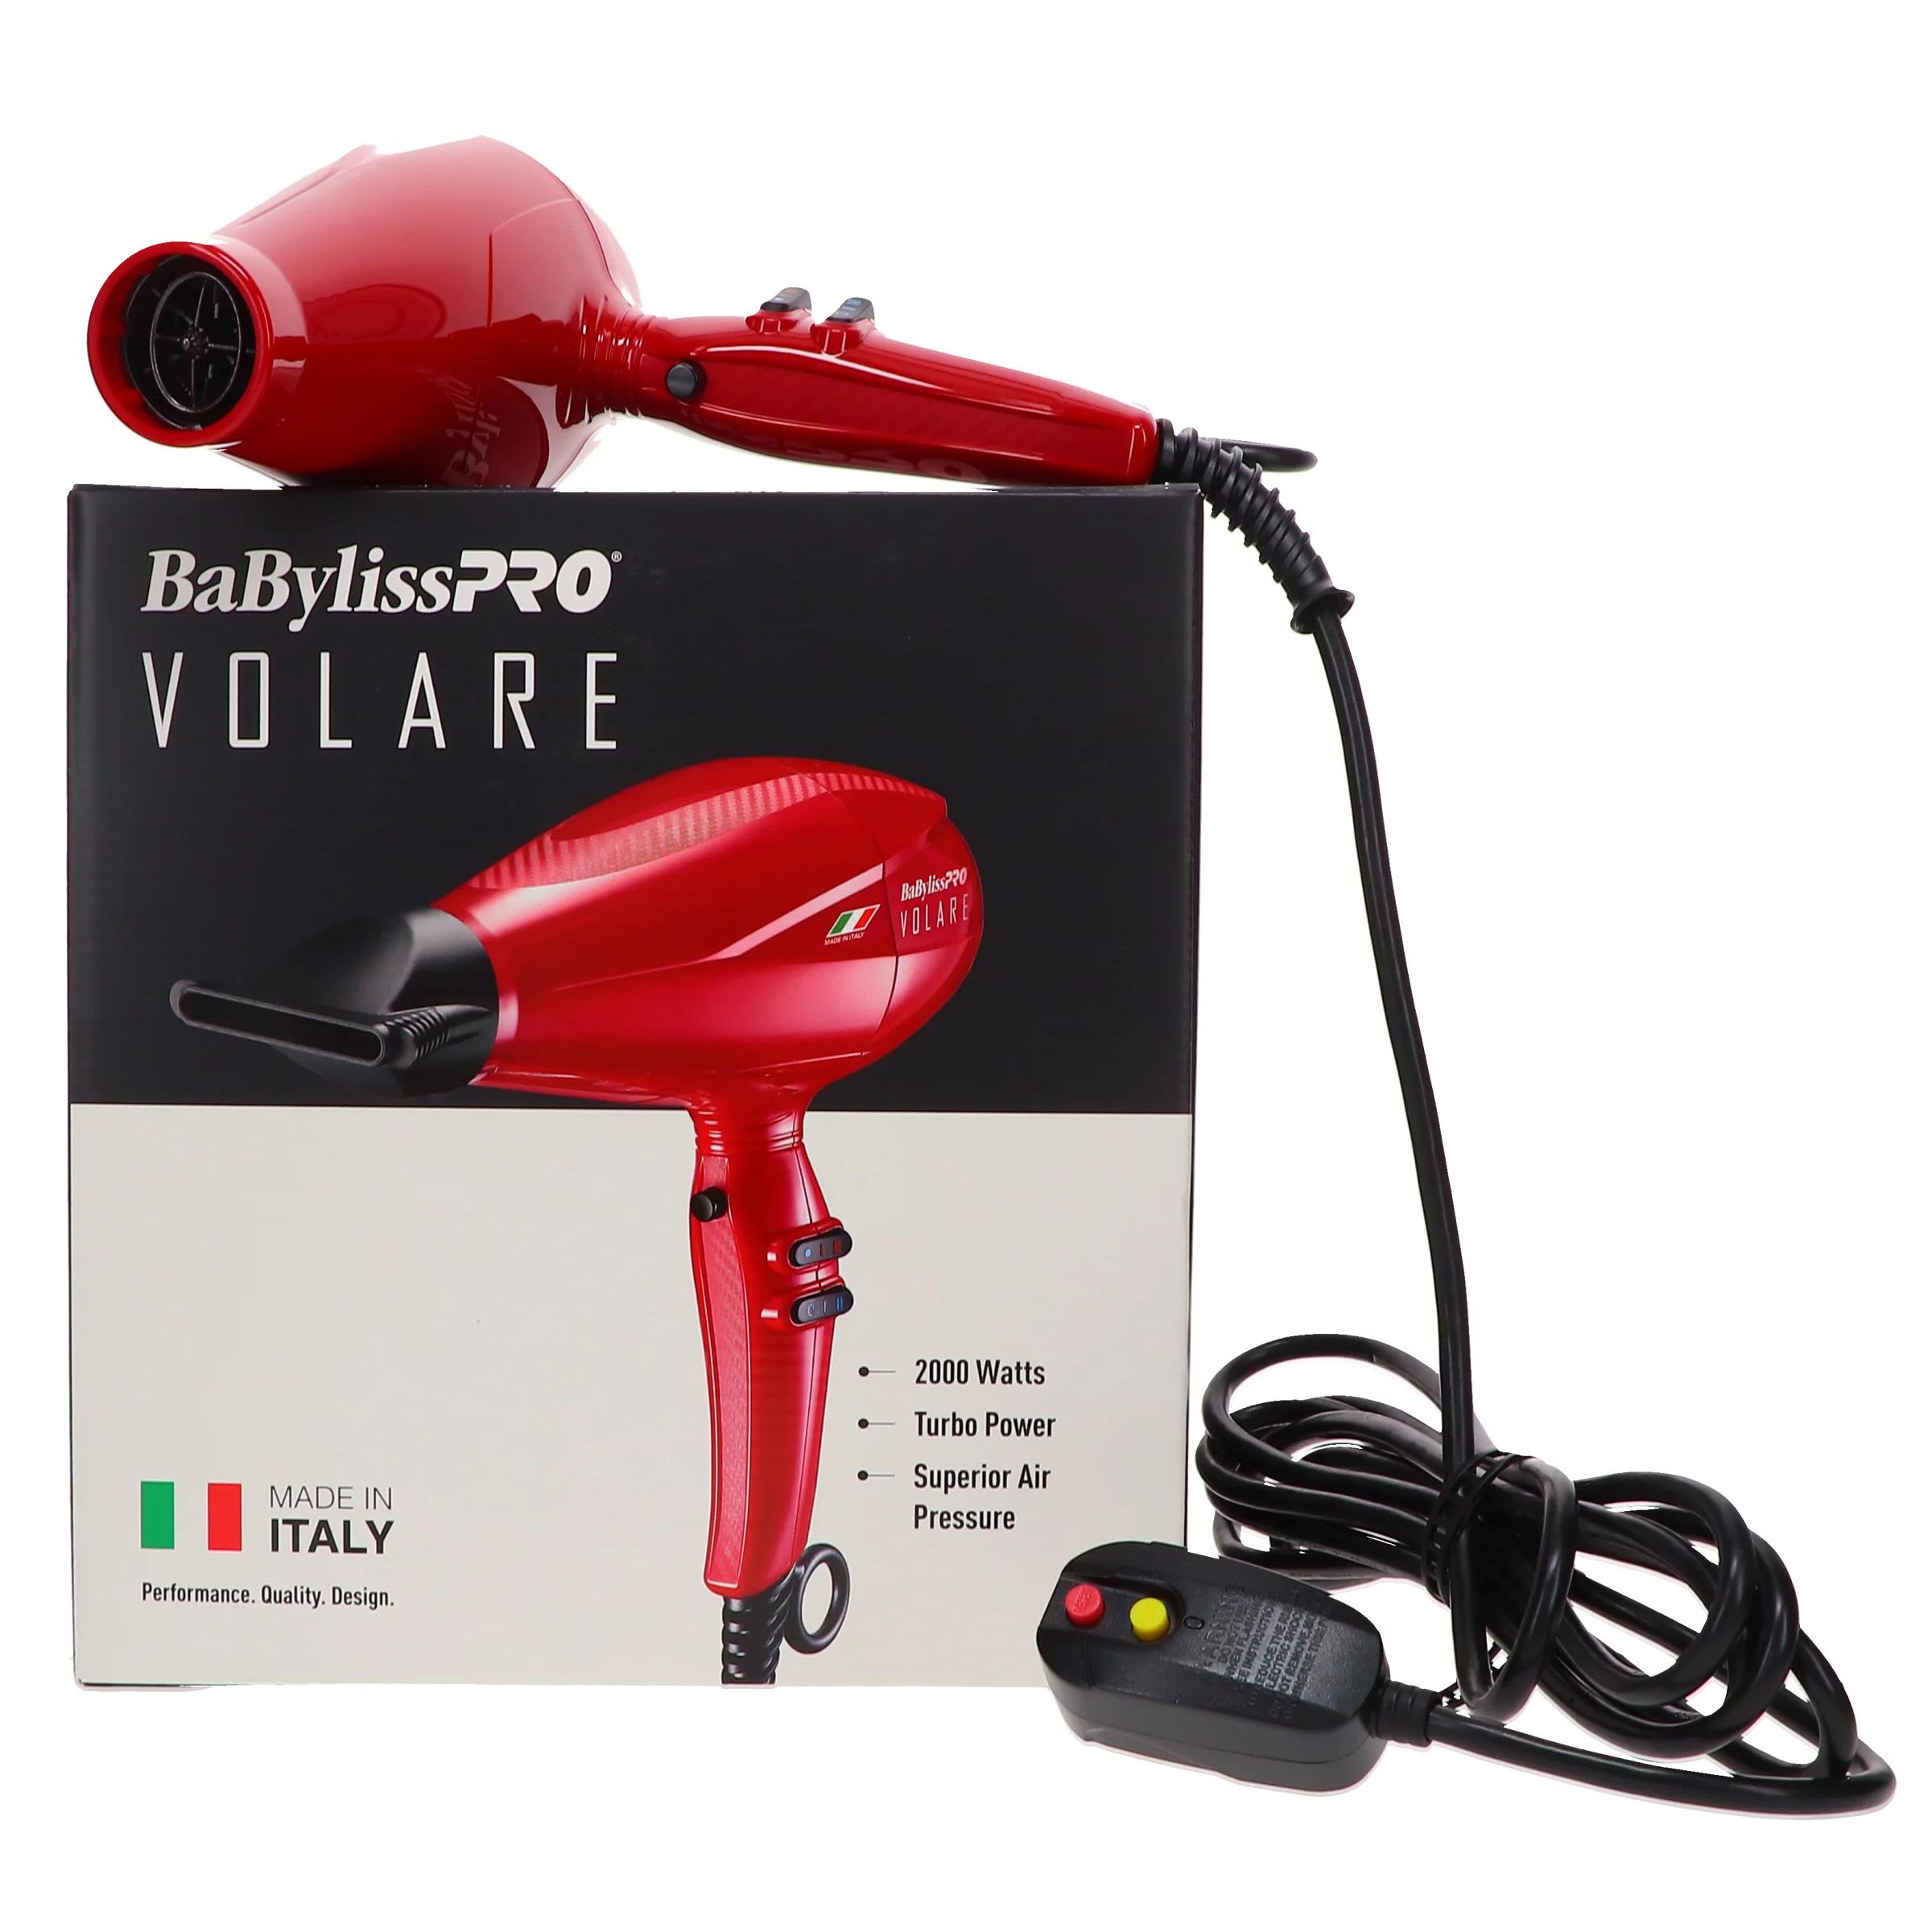 babyliss ferrari cord dryer - Which BaByliss hair dryer is the lightest